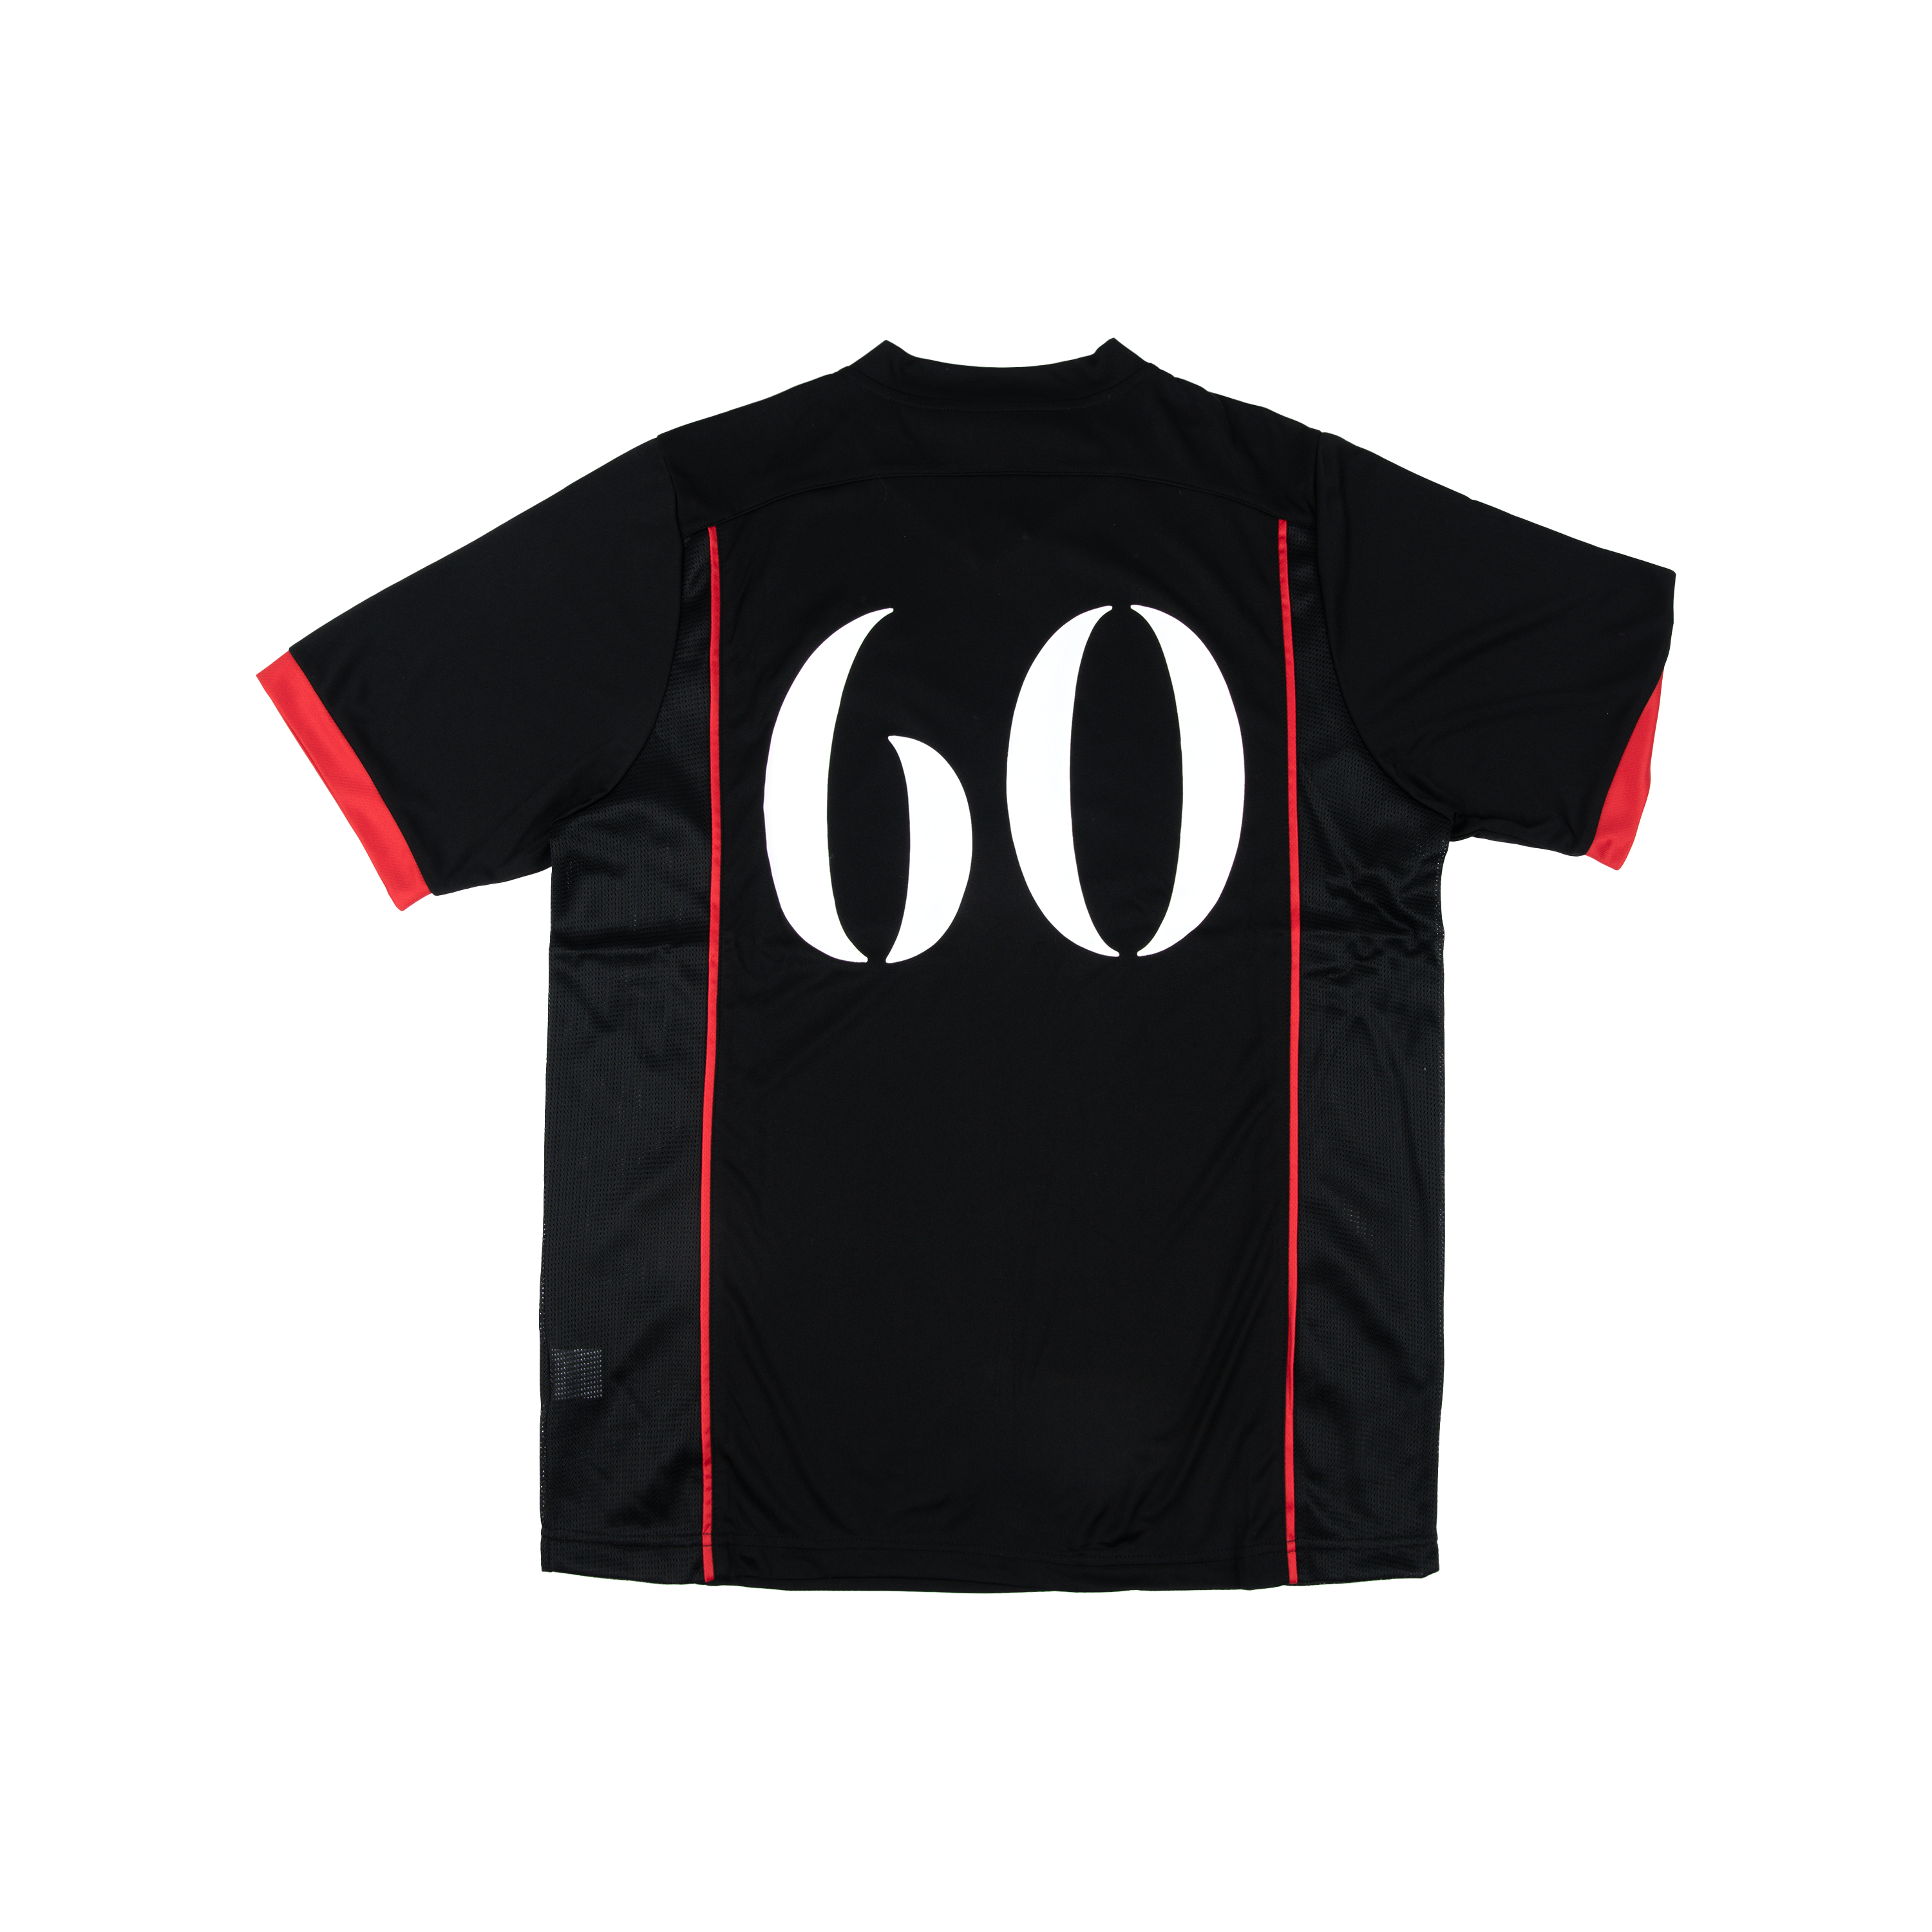 The Rolling Stones - Sixty Football Jersey